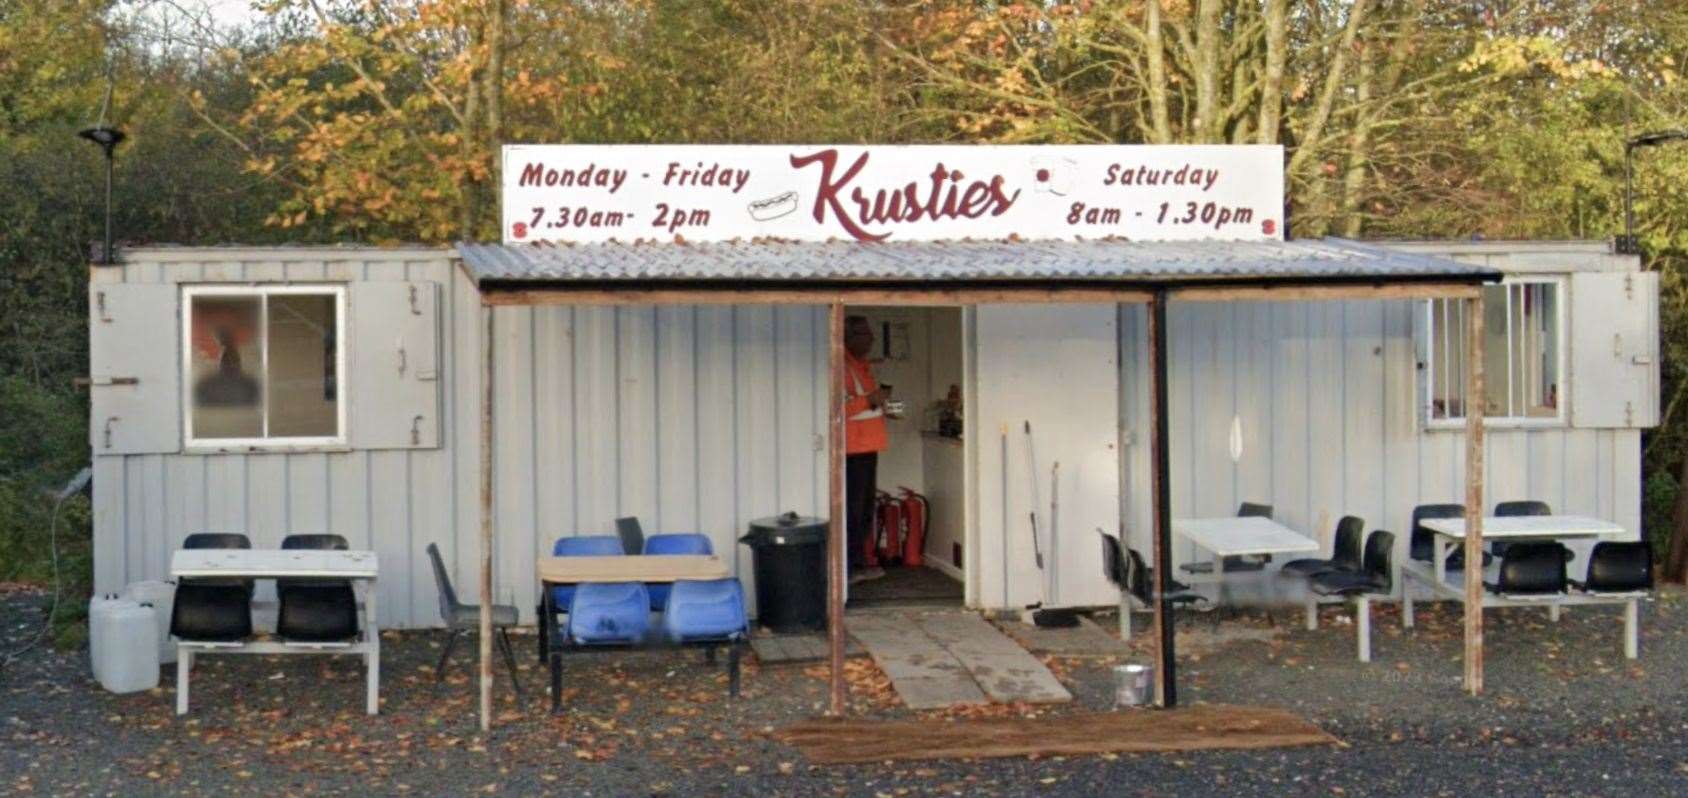 Krusties Cafe off the A260 in Adisham, near Canterbury. Picture: Google